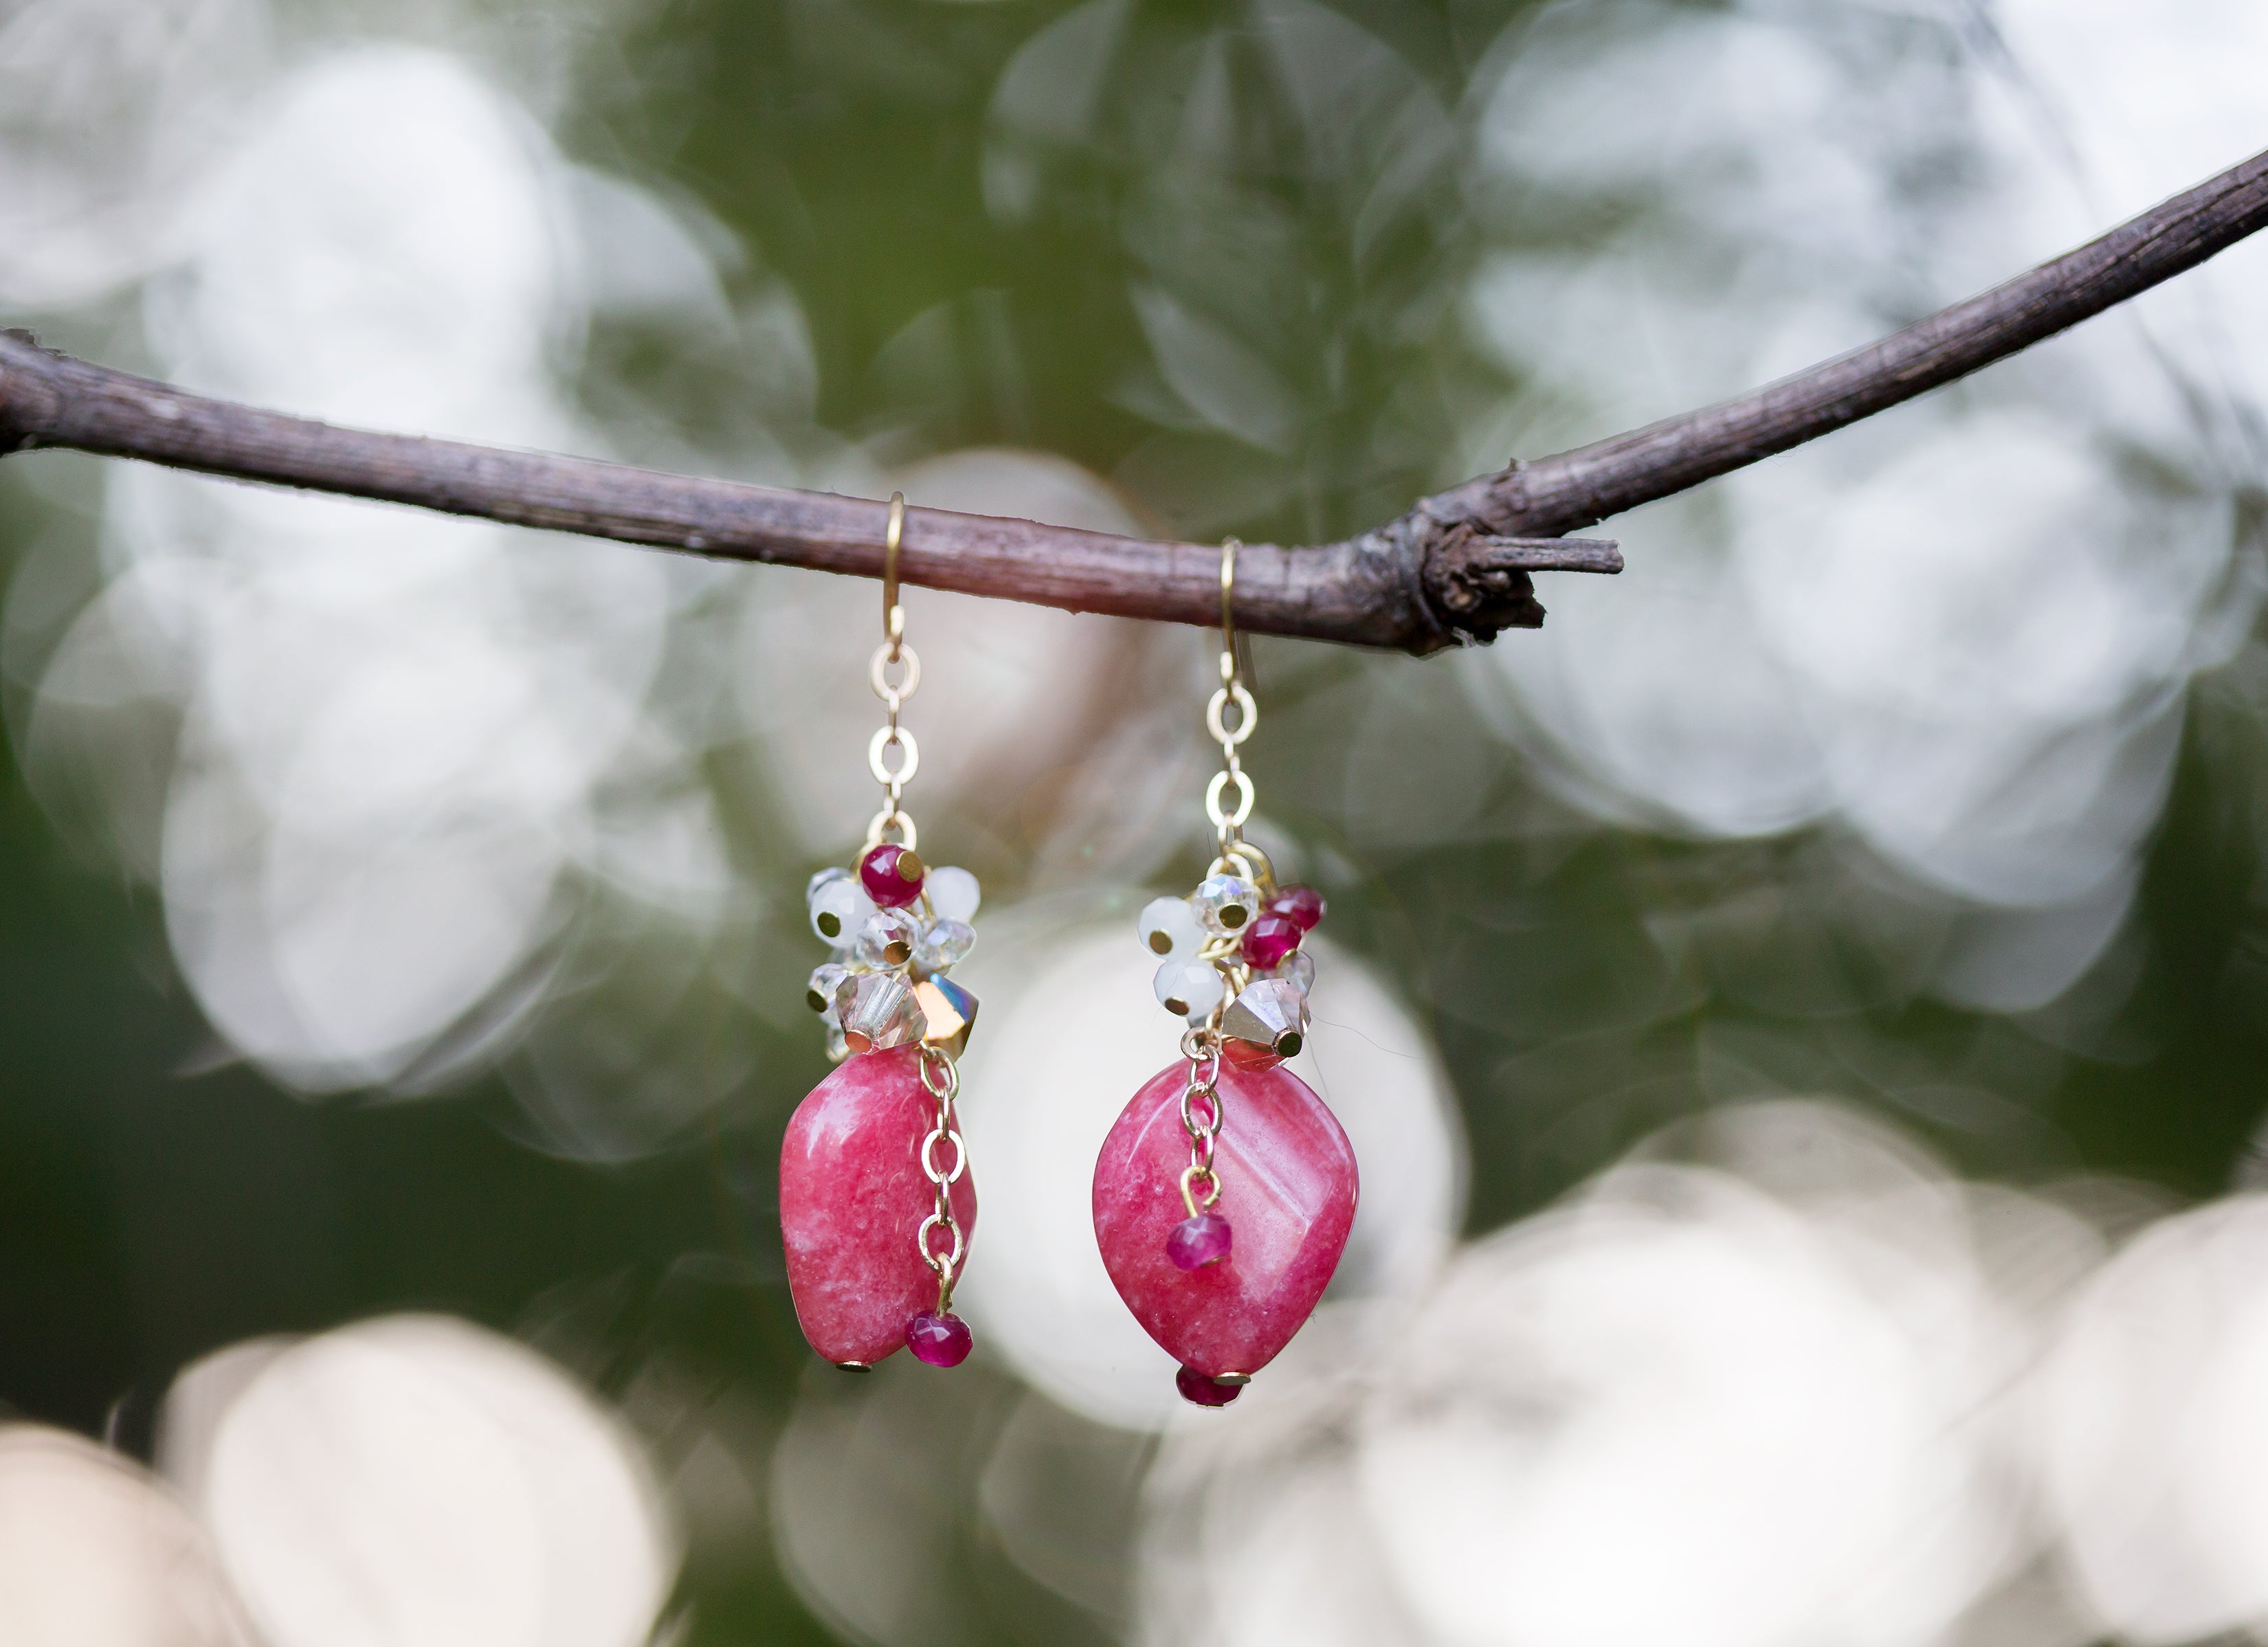 Pebbles by the Pond - Strawberry Gemstone Earrings